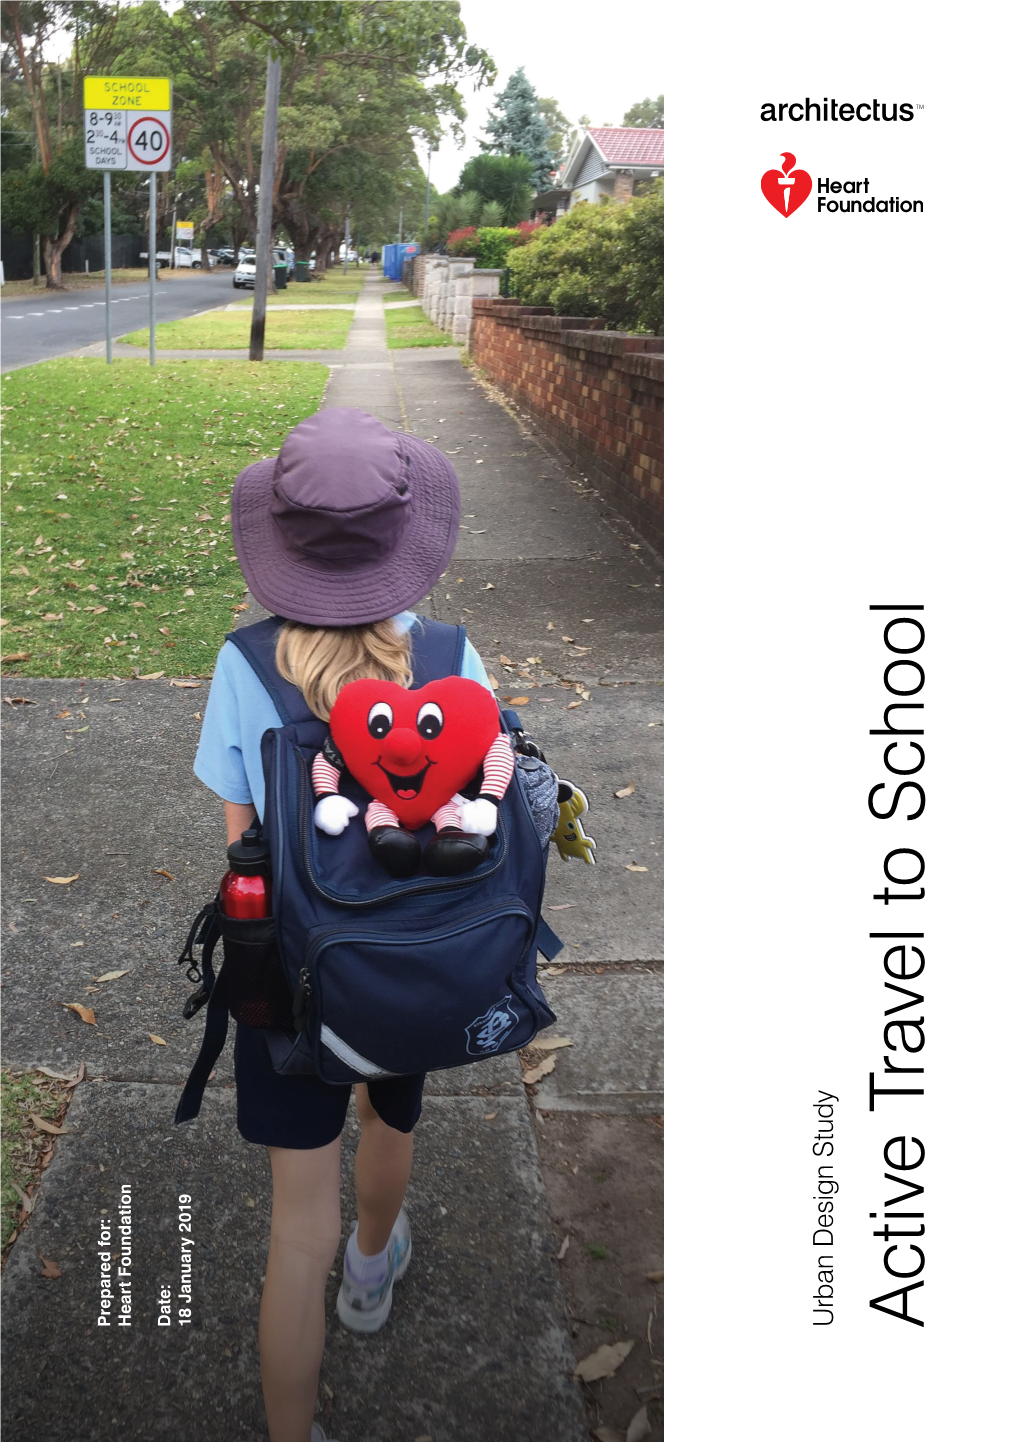 Active Travel to School “Active Commuting to School Can Contribute to Children Achieving Recommended Physical Activity Levels